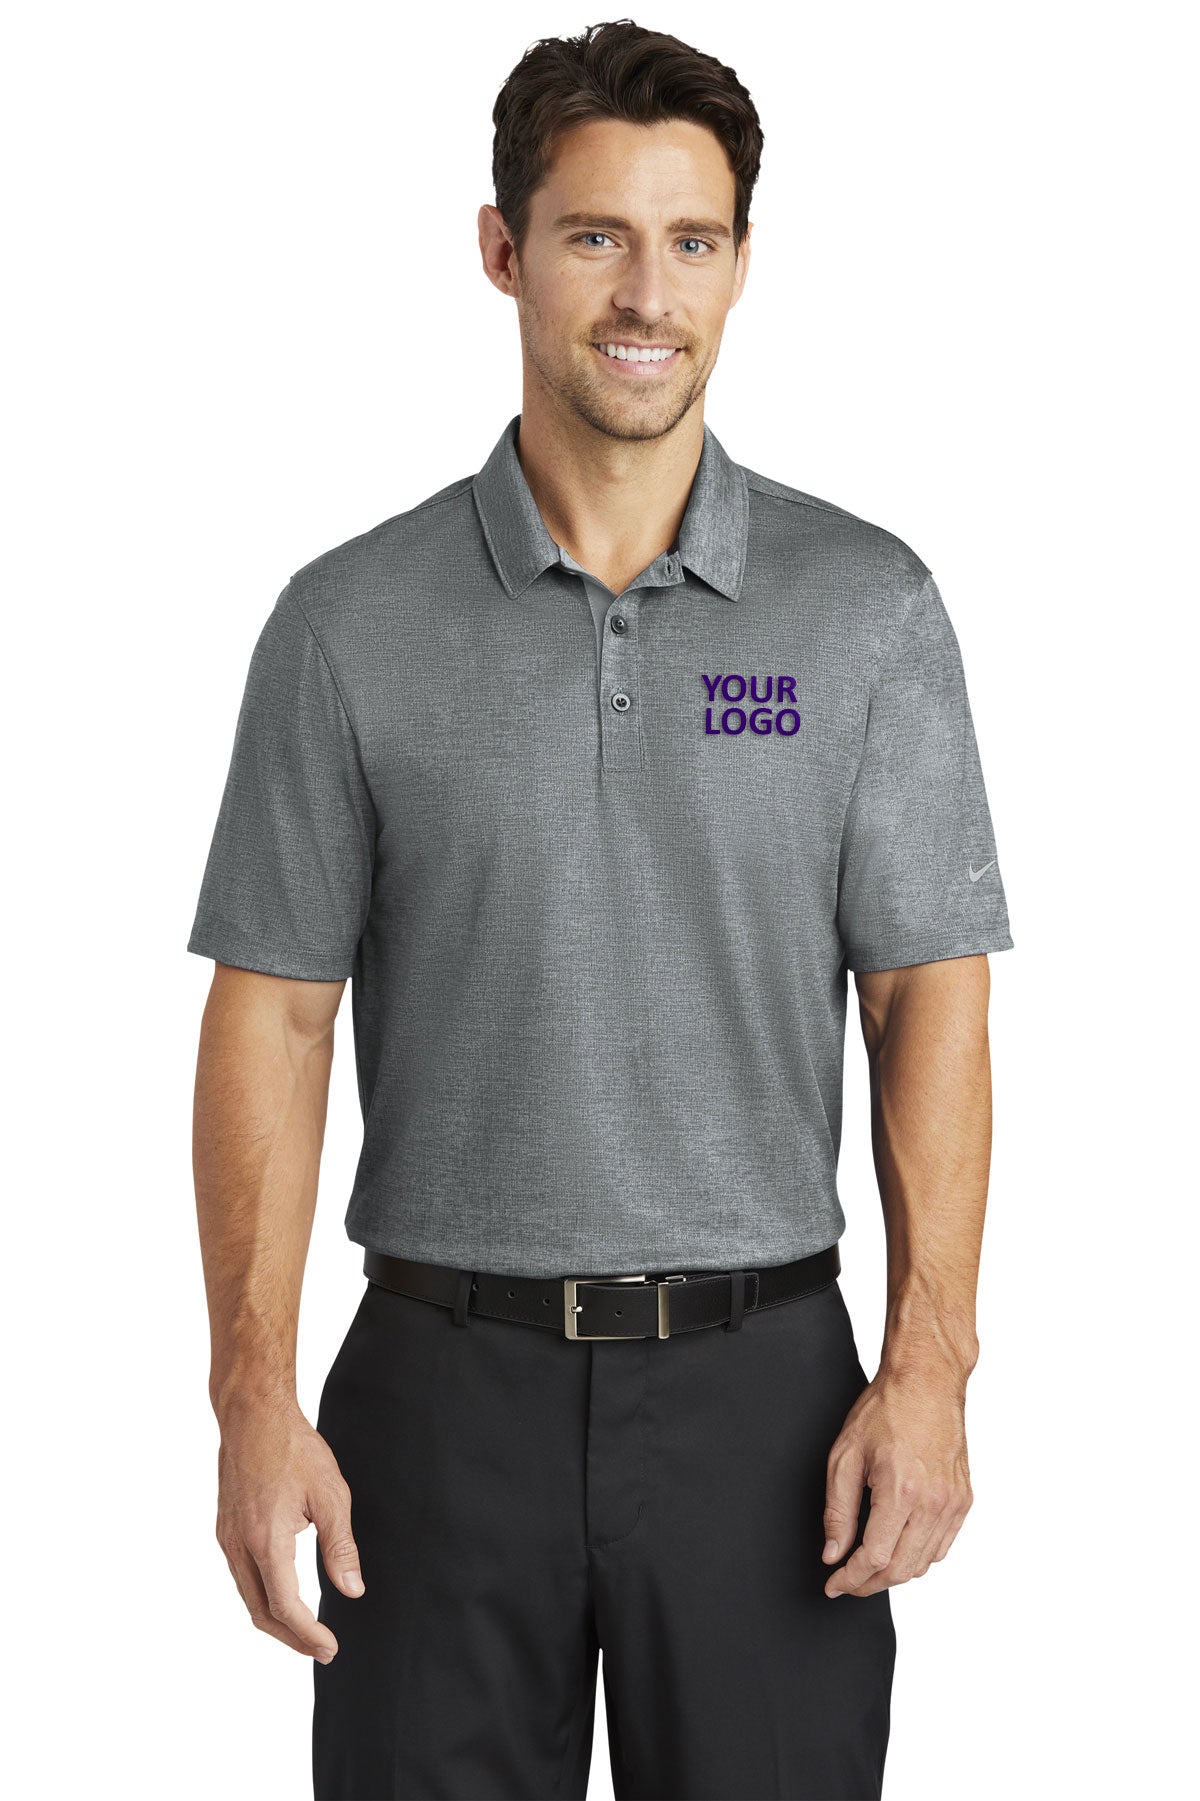 nike cool grey/ anthracite 838965 custom logo polo shirts embroidered